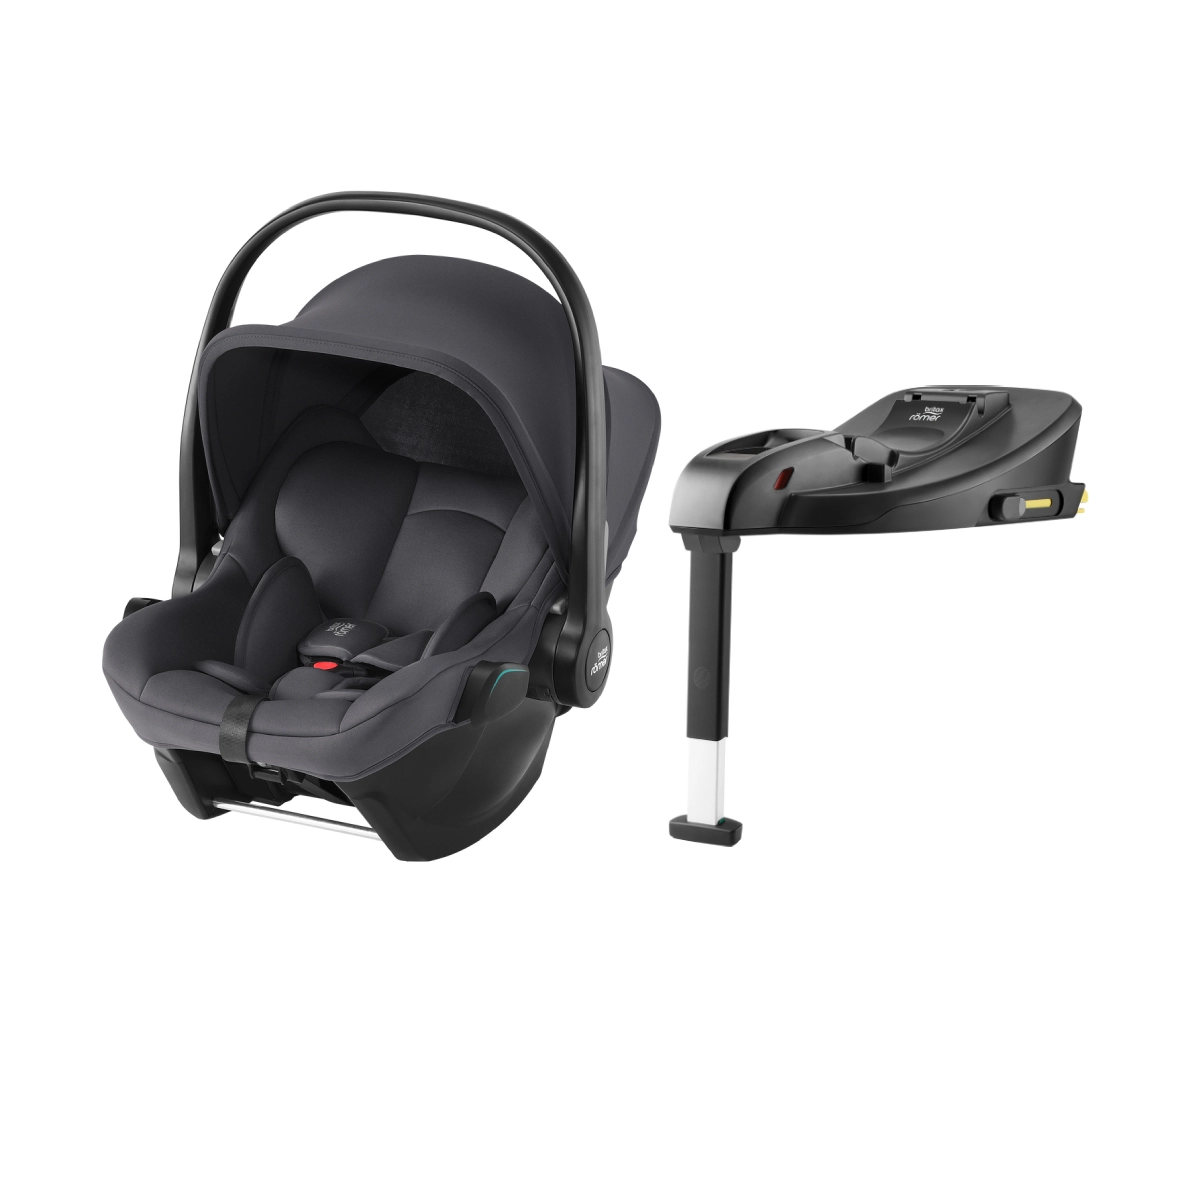 Britax Römer BABY-SAFE CORE Group 0+ Carseat with Isofix Base